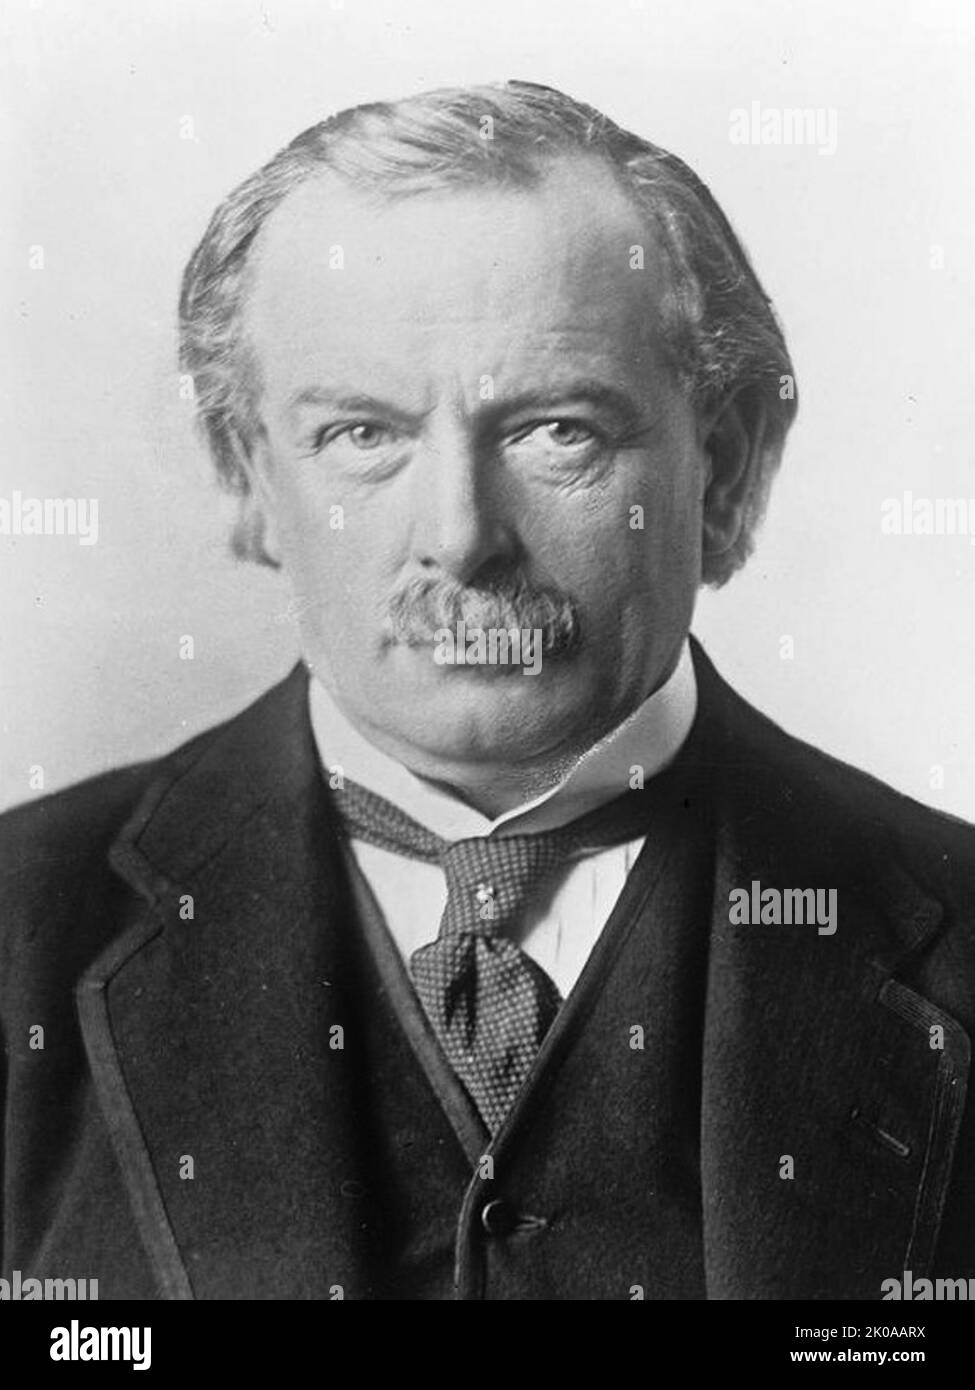 David Lloyd George, 1st Earl Lloyd-George of Dwyfor, OM PC (17 January 1863 - 26 March 1945) was a British statesman and Liberal Party politician who served as Prime Minister of the United Kingdom from 1916 to 1922. The last Liberal to serve as prime minister, he held the office during the final two years of the First World War and led the British delegation at the 1919 Paris Peace Conference Stock Photo